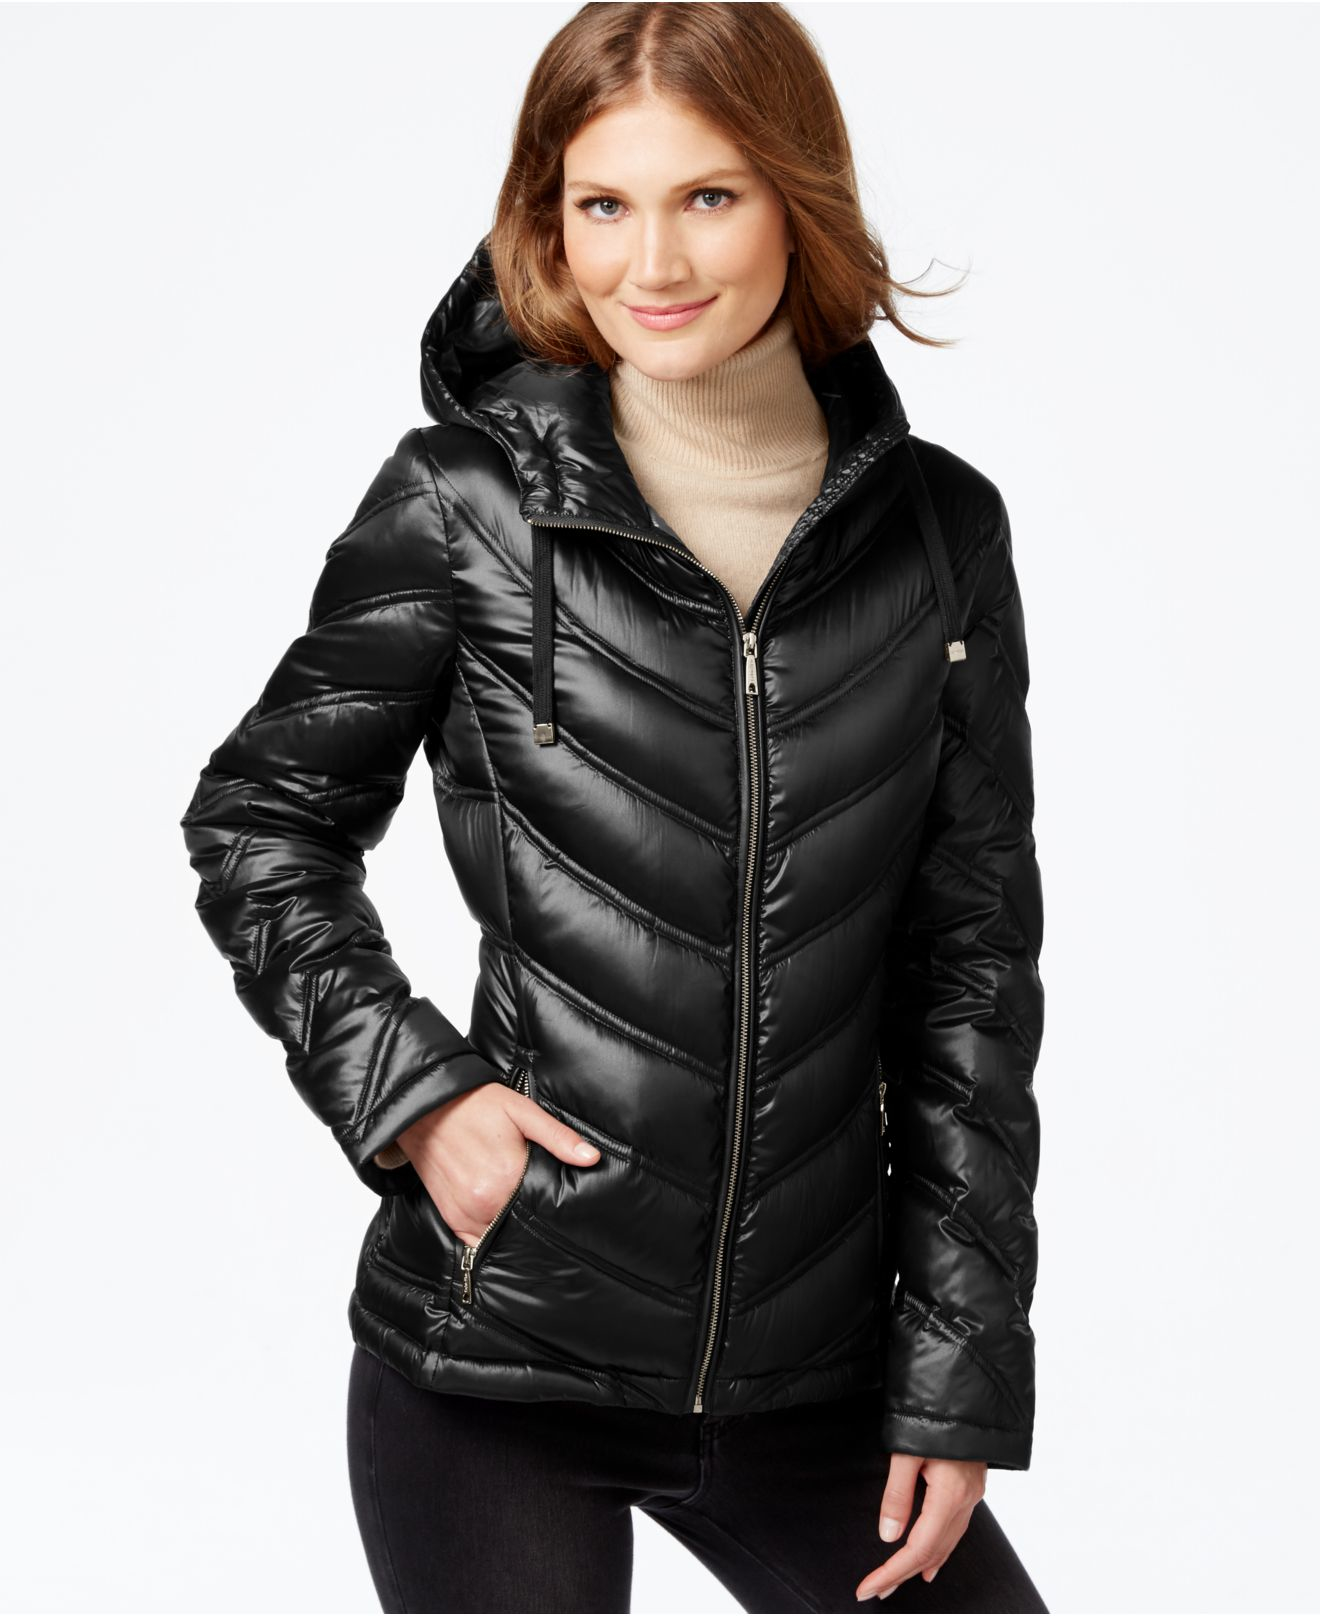 Calvin Klein Black Chevron Quilted Packable Down Puffer Coat Product 0 212487957 Normal 